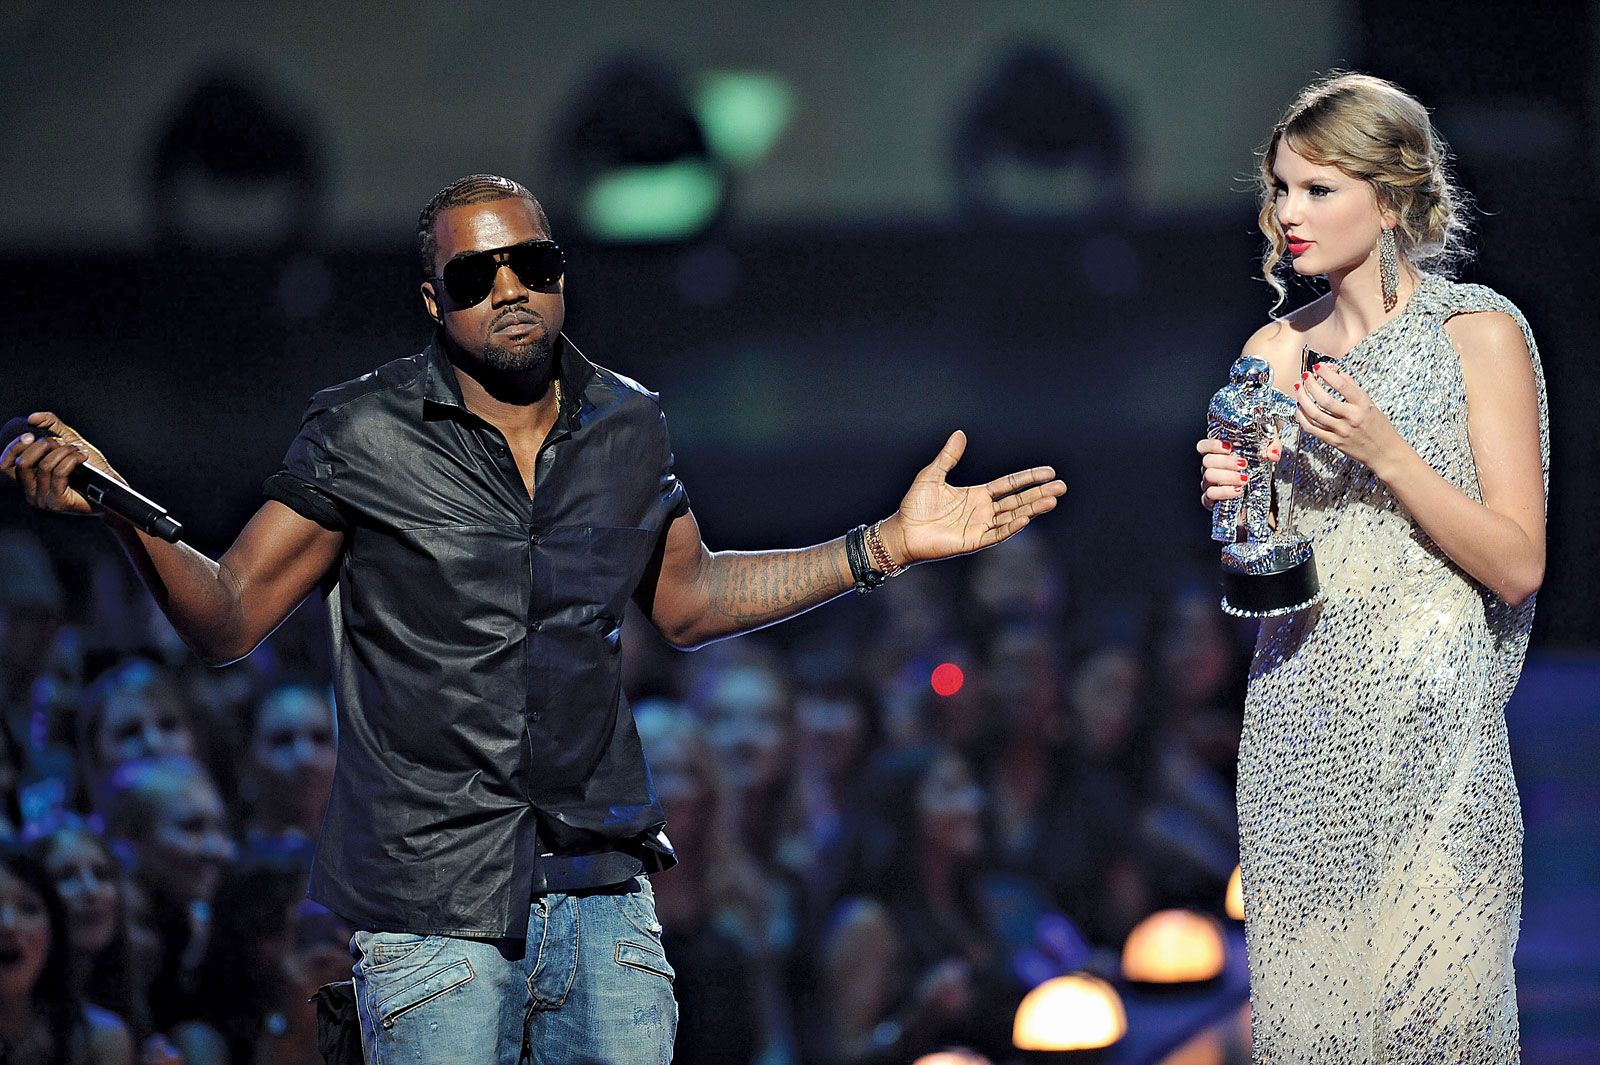 The 10 Most Controversial Moments In Vma History With Pics